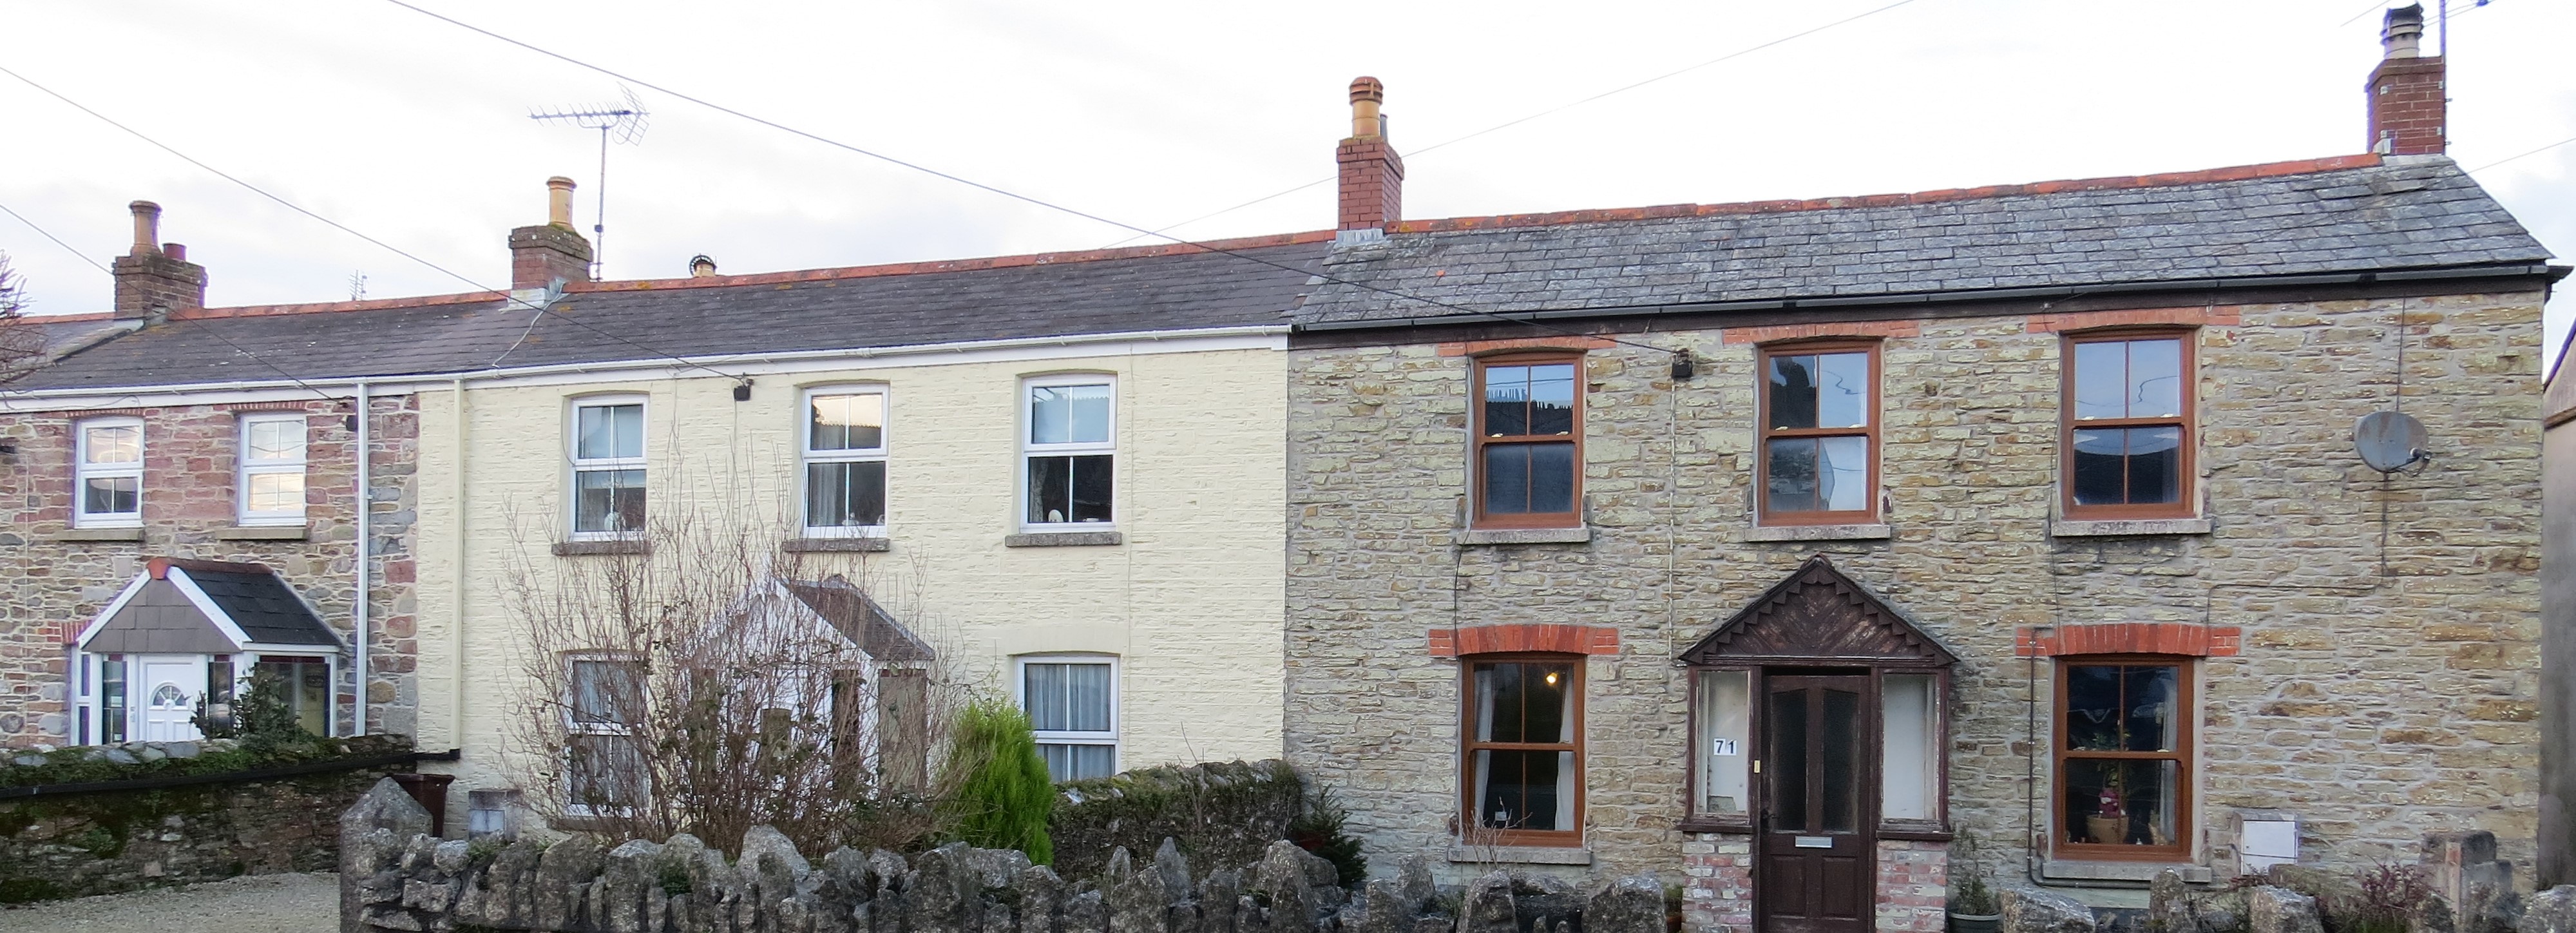 Party Wall properties at Parr, Cornwall